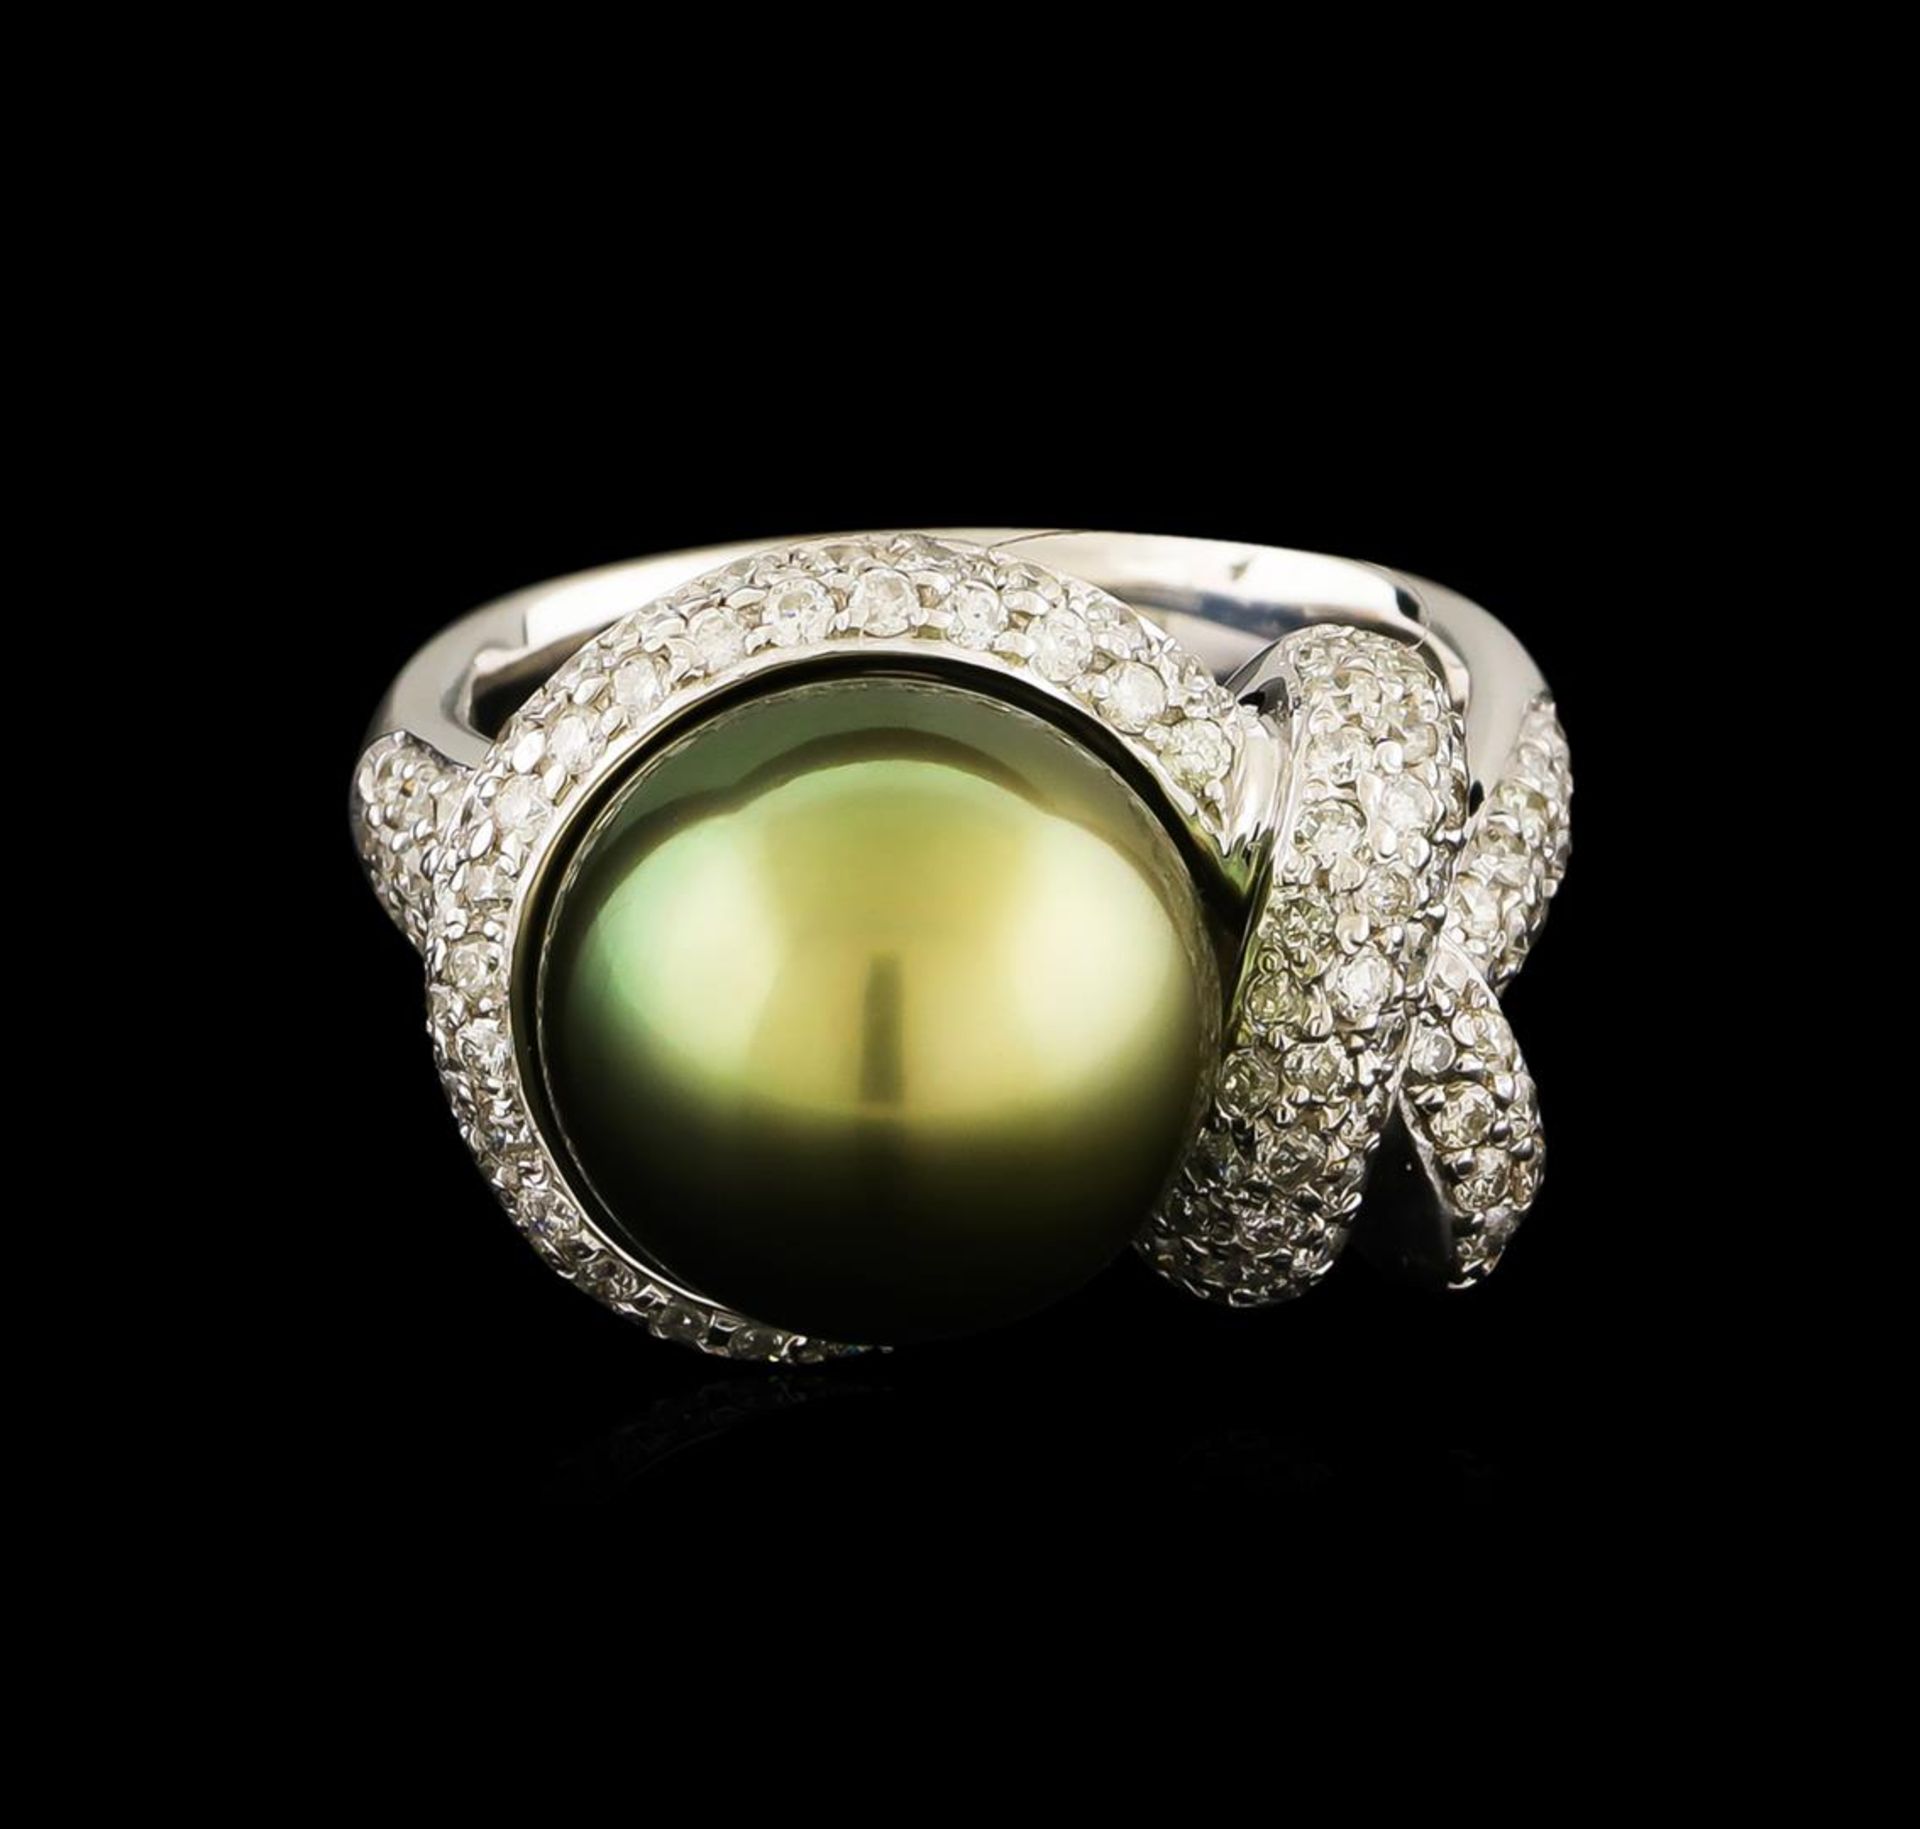 Tahitian Pearl and Diamond Ring - 14KT White Gold - Image 2 of 5